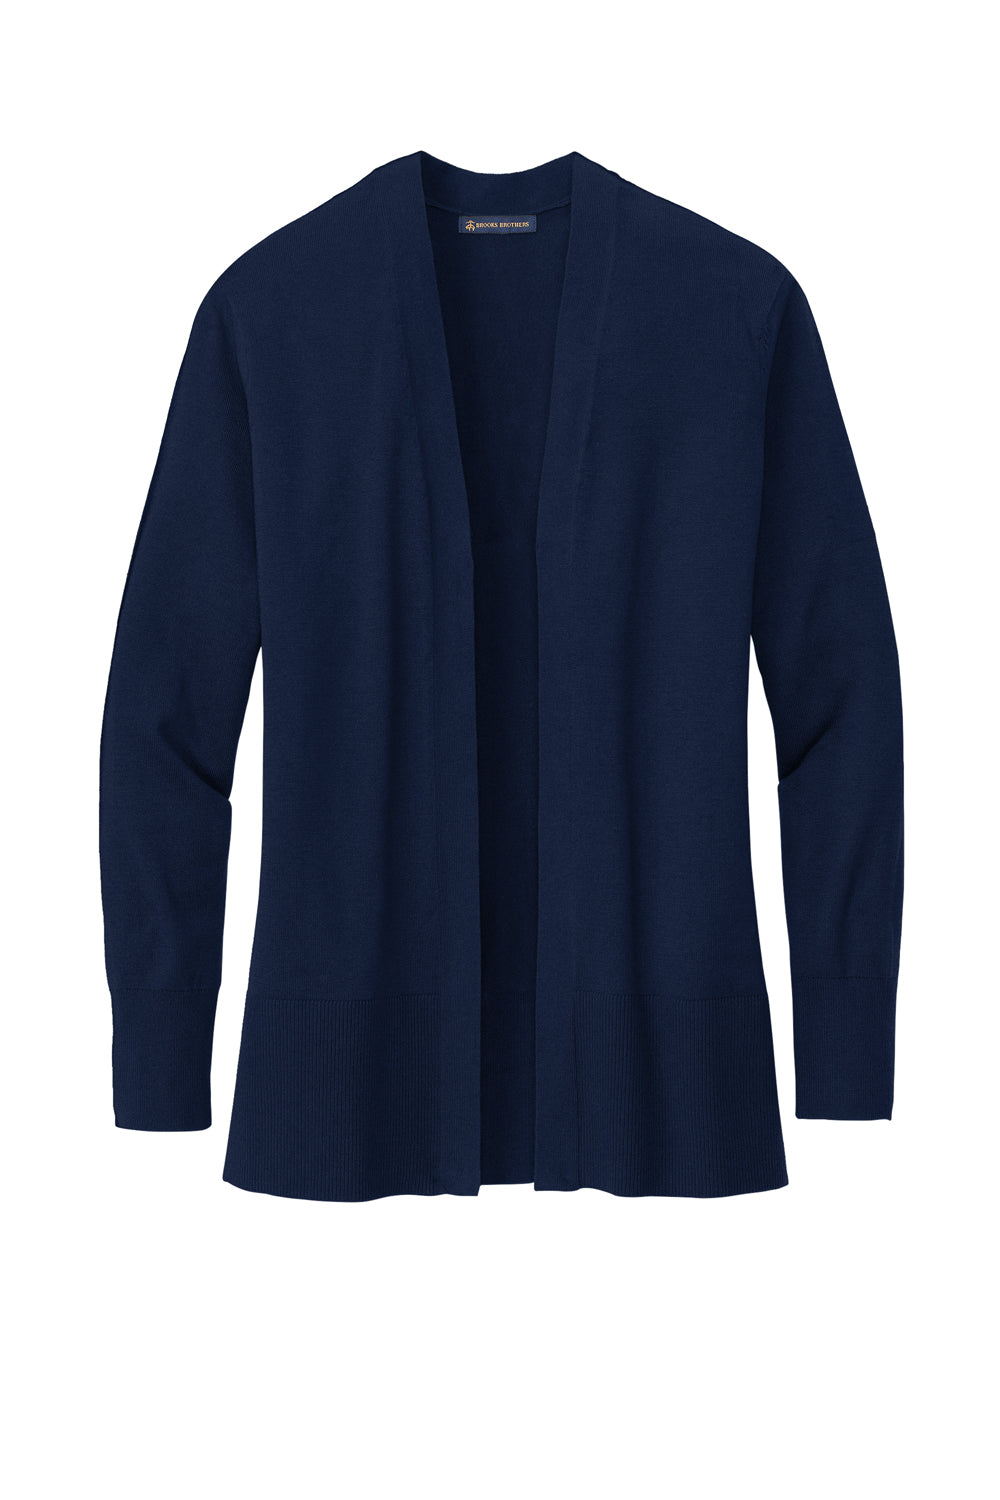 Brooks Brothers Womens Long Sleeeve Cardigan Sweater Navy Blue Flat Front